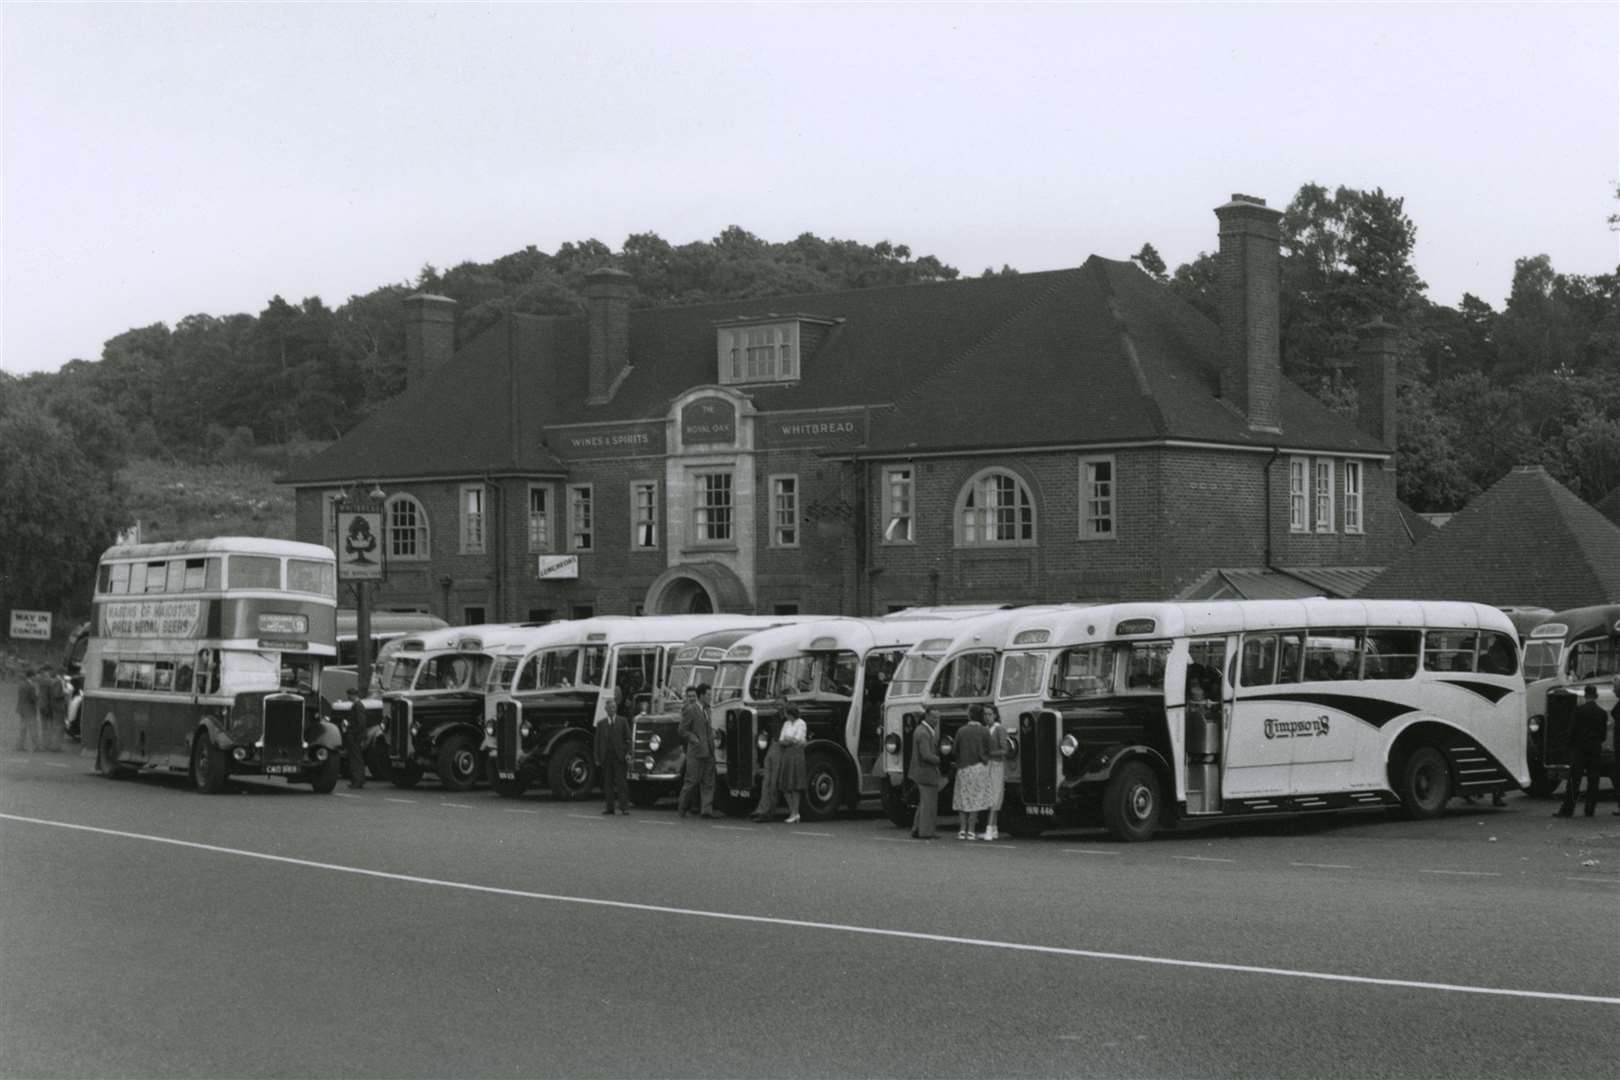 The Royal Oak in Wrotham was a popular stop for day-trippers in the 1950s